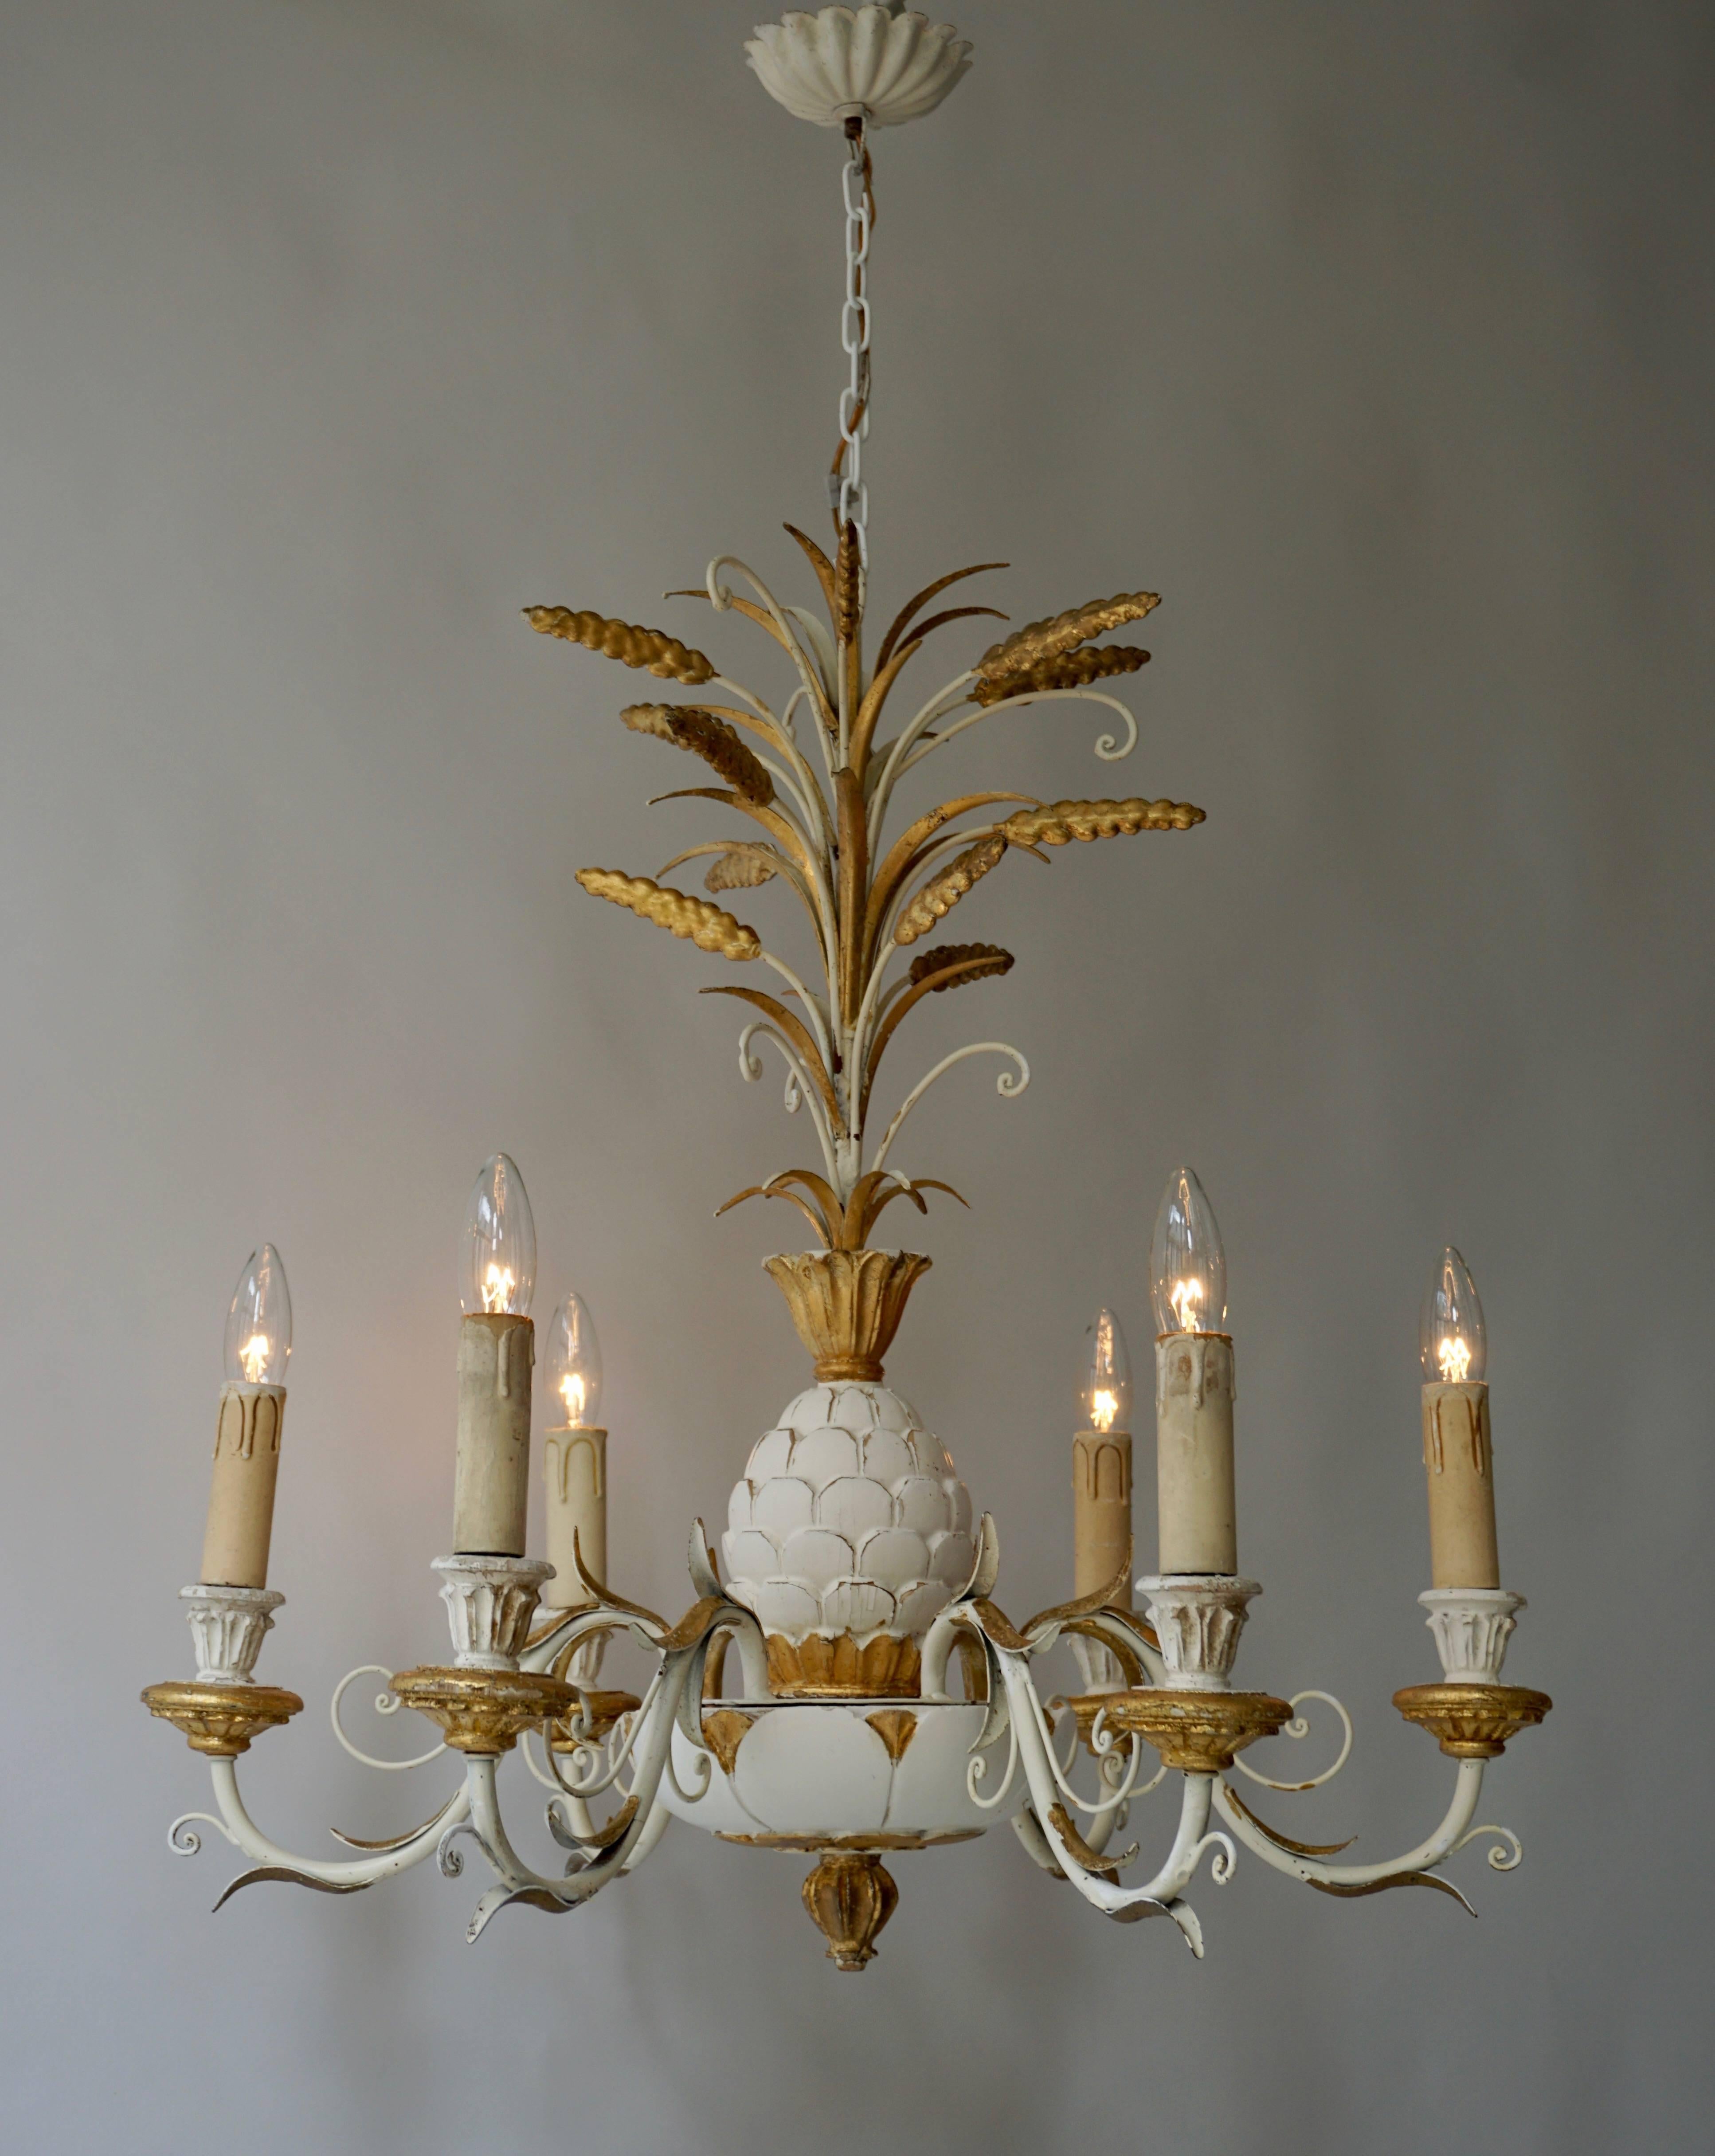 French 1950s Carved Giltwood Italian Gold and White Pineapple Chandelier